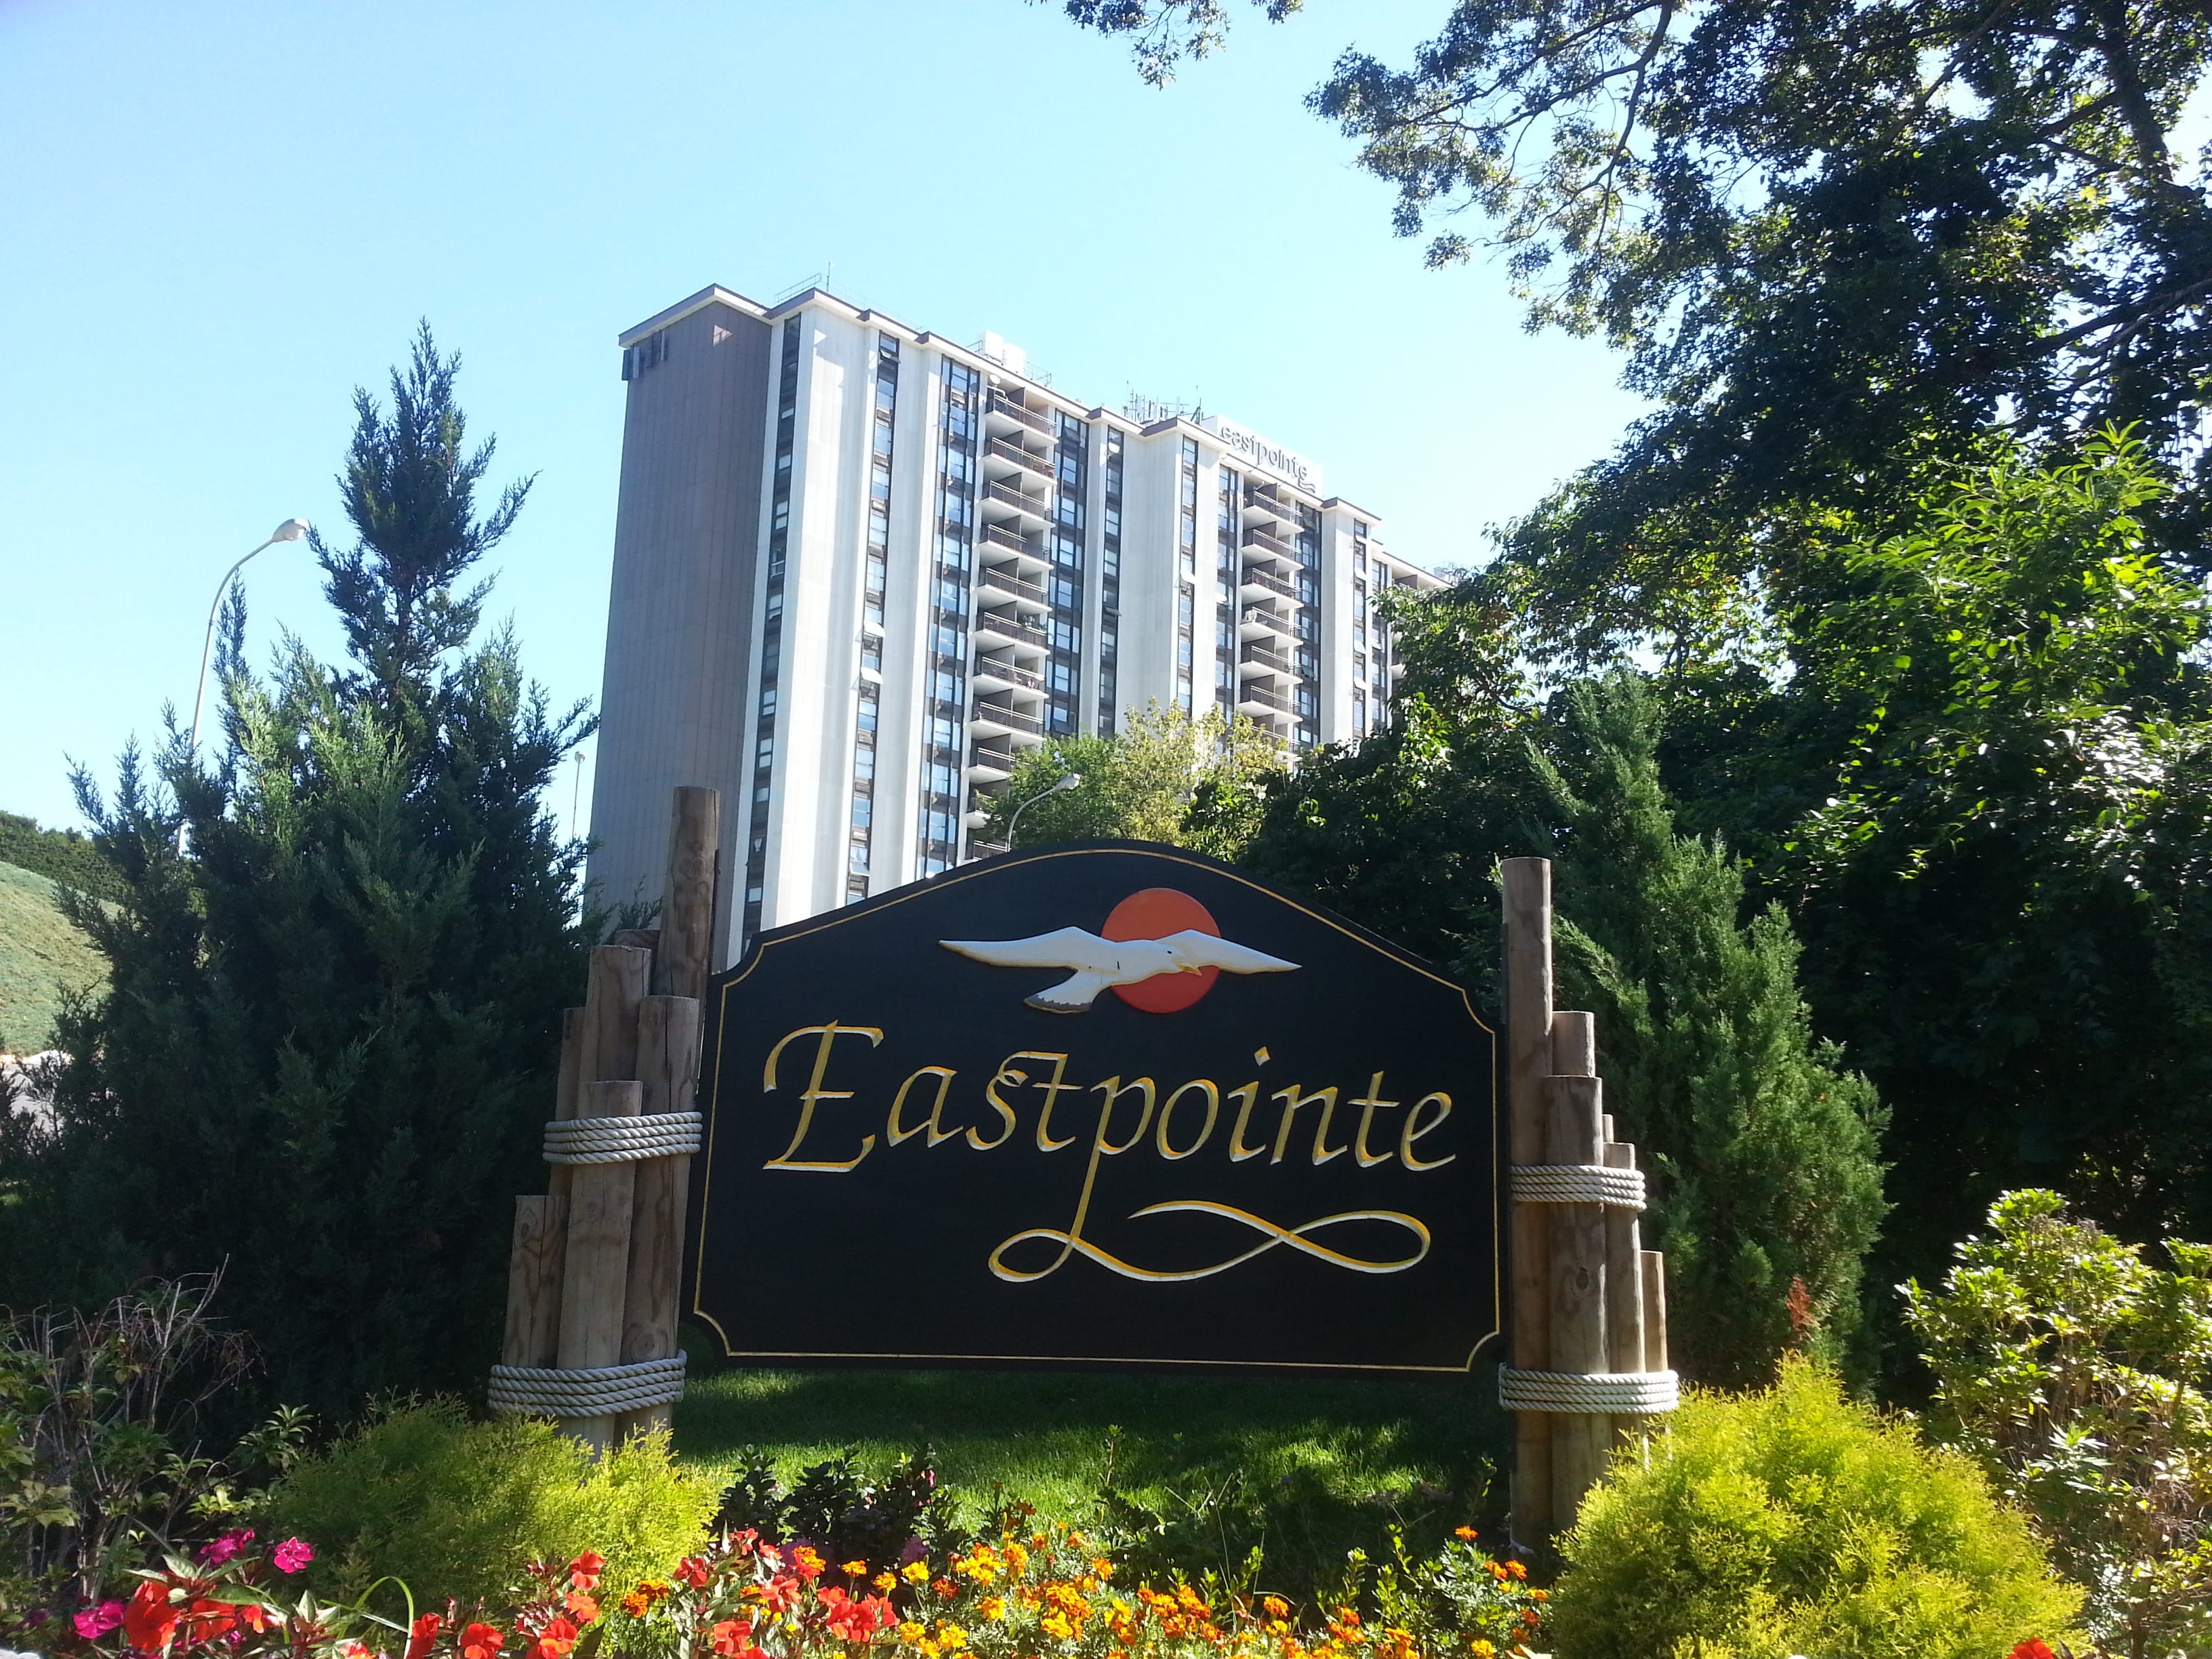 Eastpointe Condominium, located at 1 Scenic Dr., Highlands, NJ, overlooks Sandy Hook Bay and NYC..